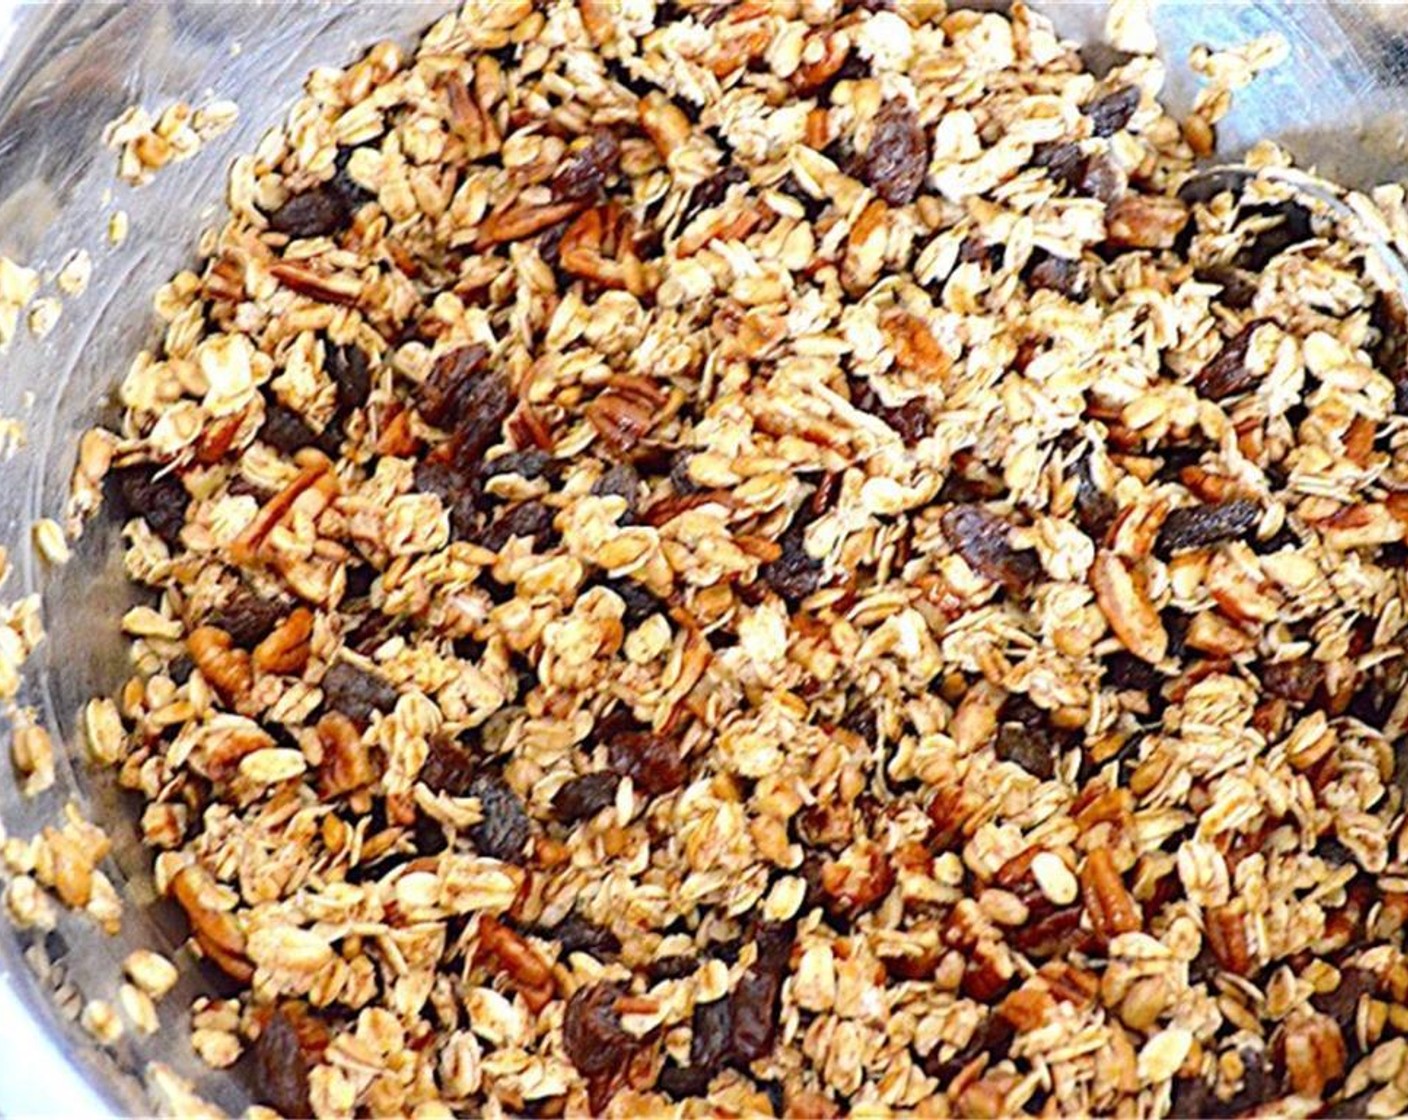 step 2 Combine the Old Fashioned Rolled Oats (3 cups), Chopped Pecans (1 1/2 cups), Raisins (1 1/2 cups), Shelled Sunflower Seeds (1 1/2 cups), Ground Cinnamon (1/2 Tbsp), Salt (1 pinch), Maple Syrup (3/4 cup), and Water (3/4 cup) in a large mixing bowl. Stir thoroughly until combined.